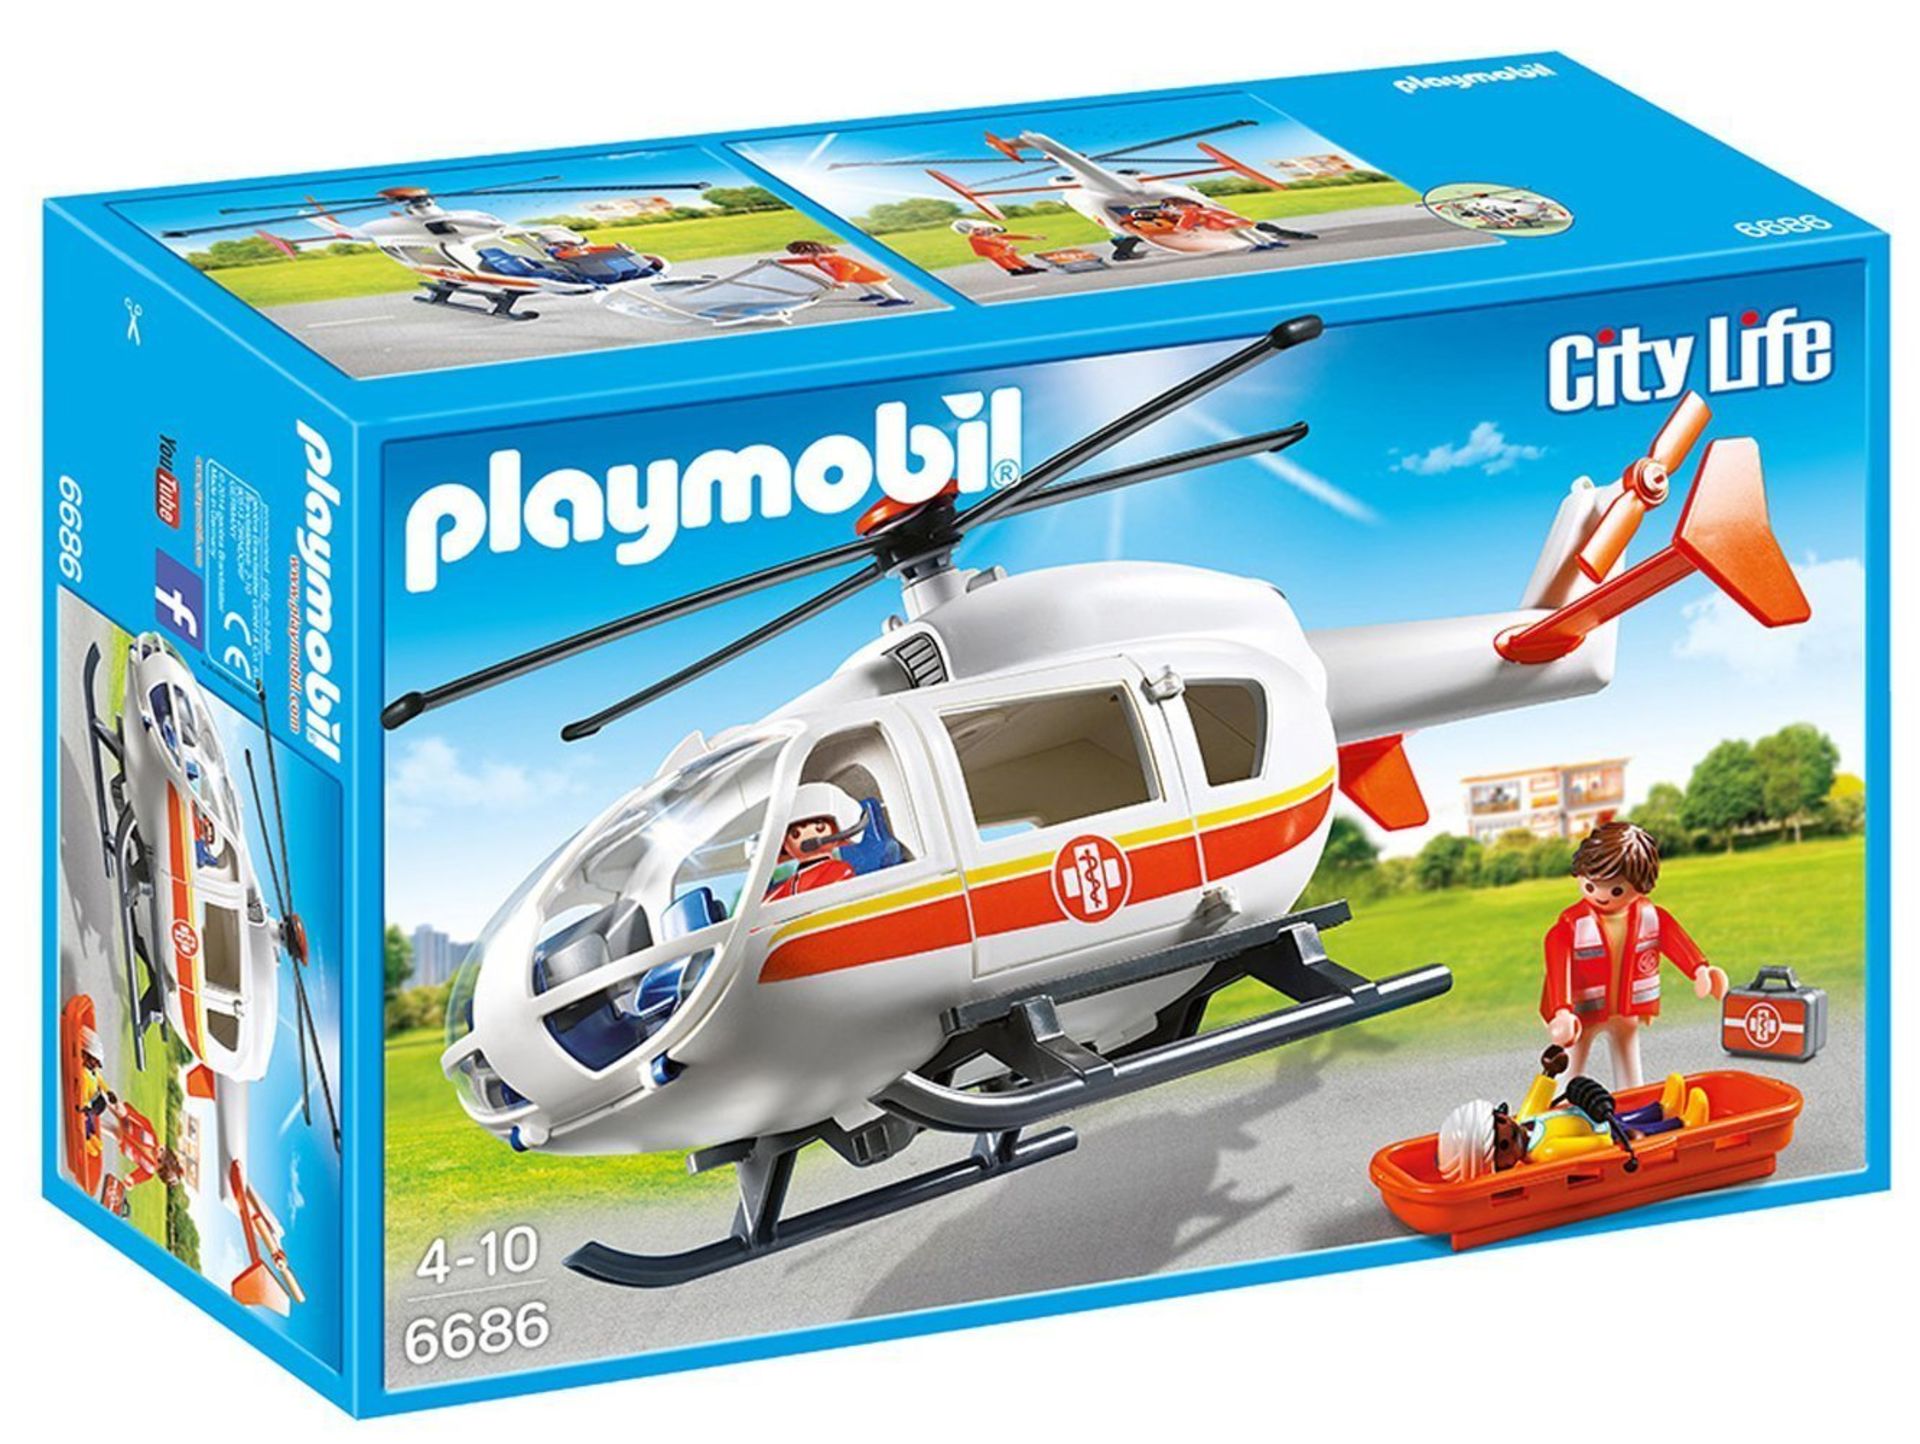 14 x Playmobil toys as described | RRP £732.36 - Image 3 of 4